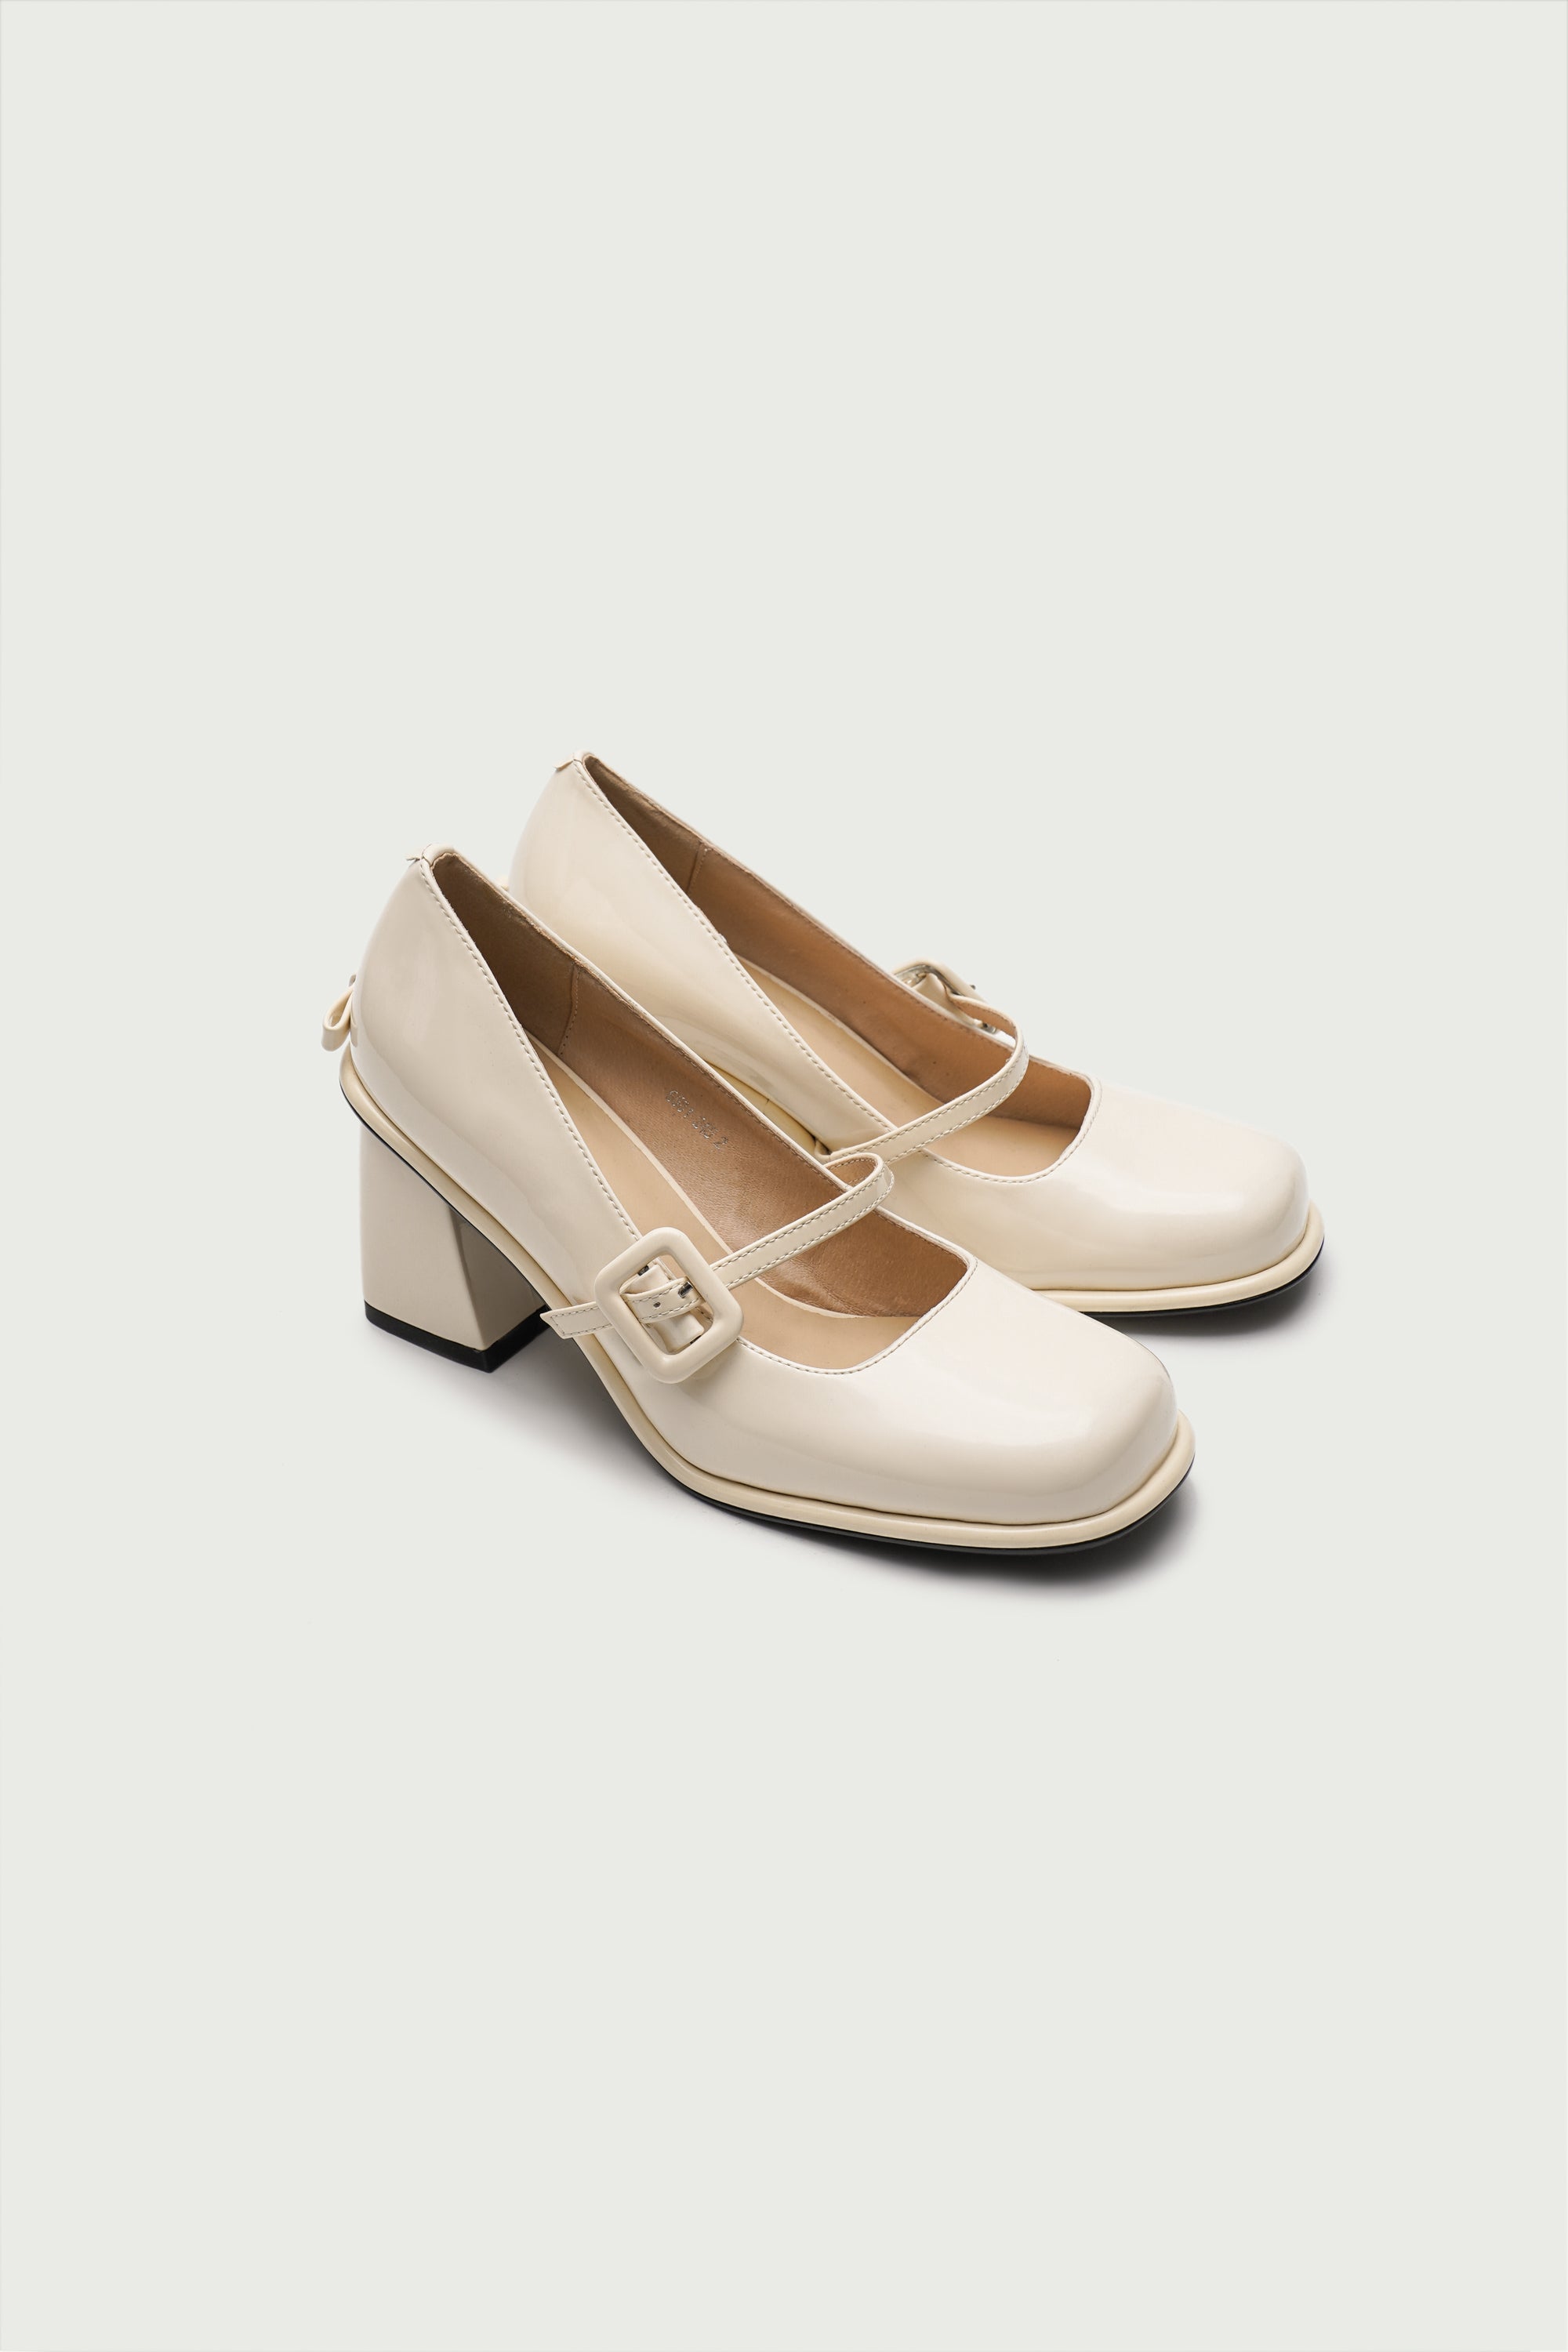 Doll House Leather Pumps - White